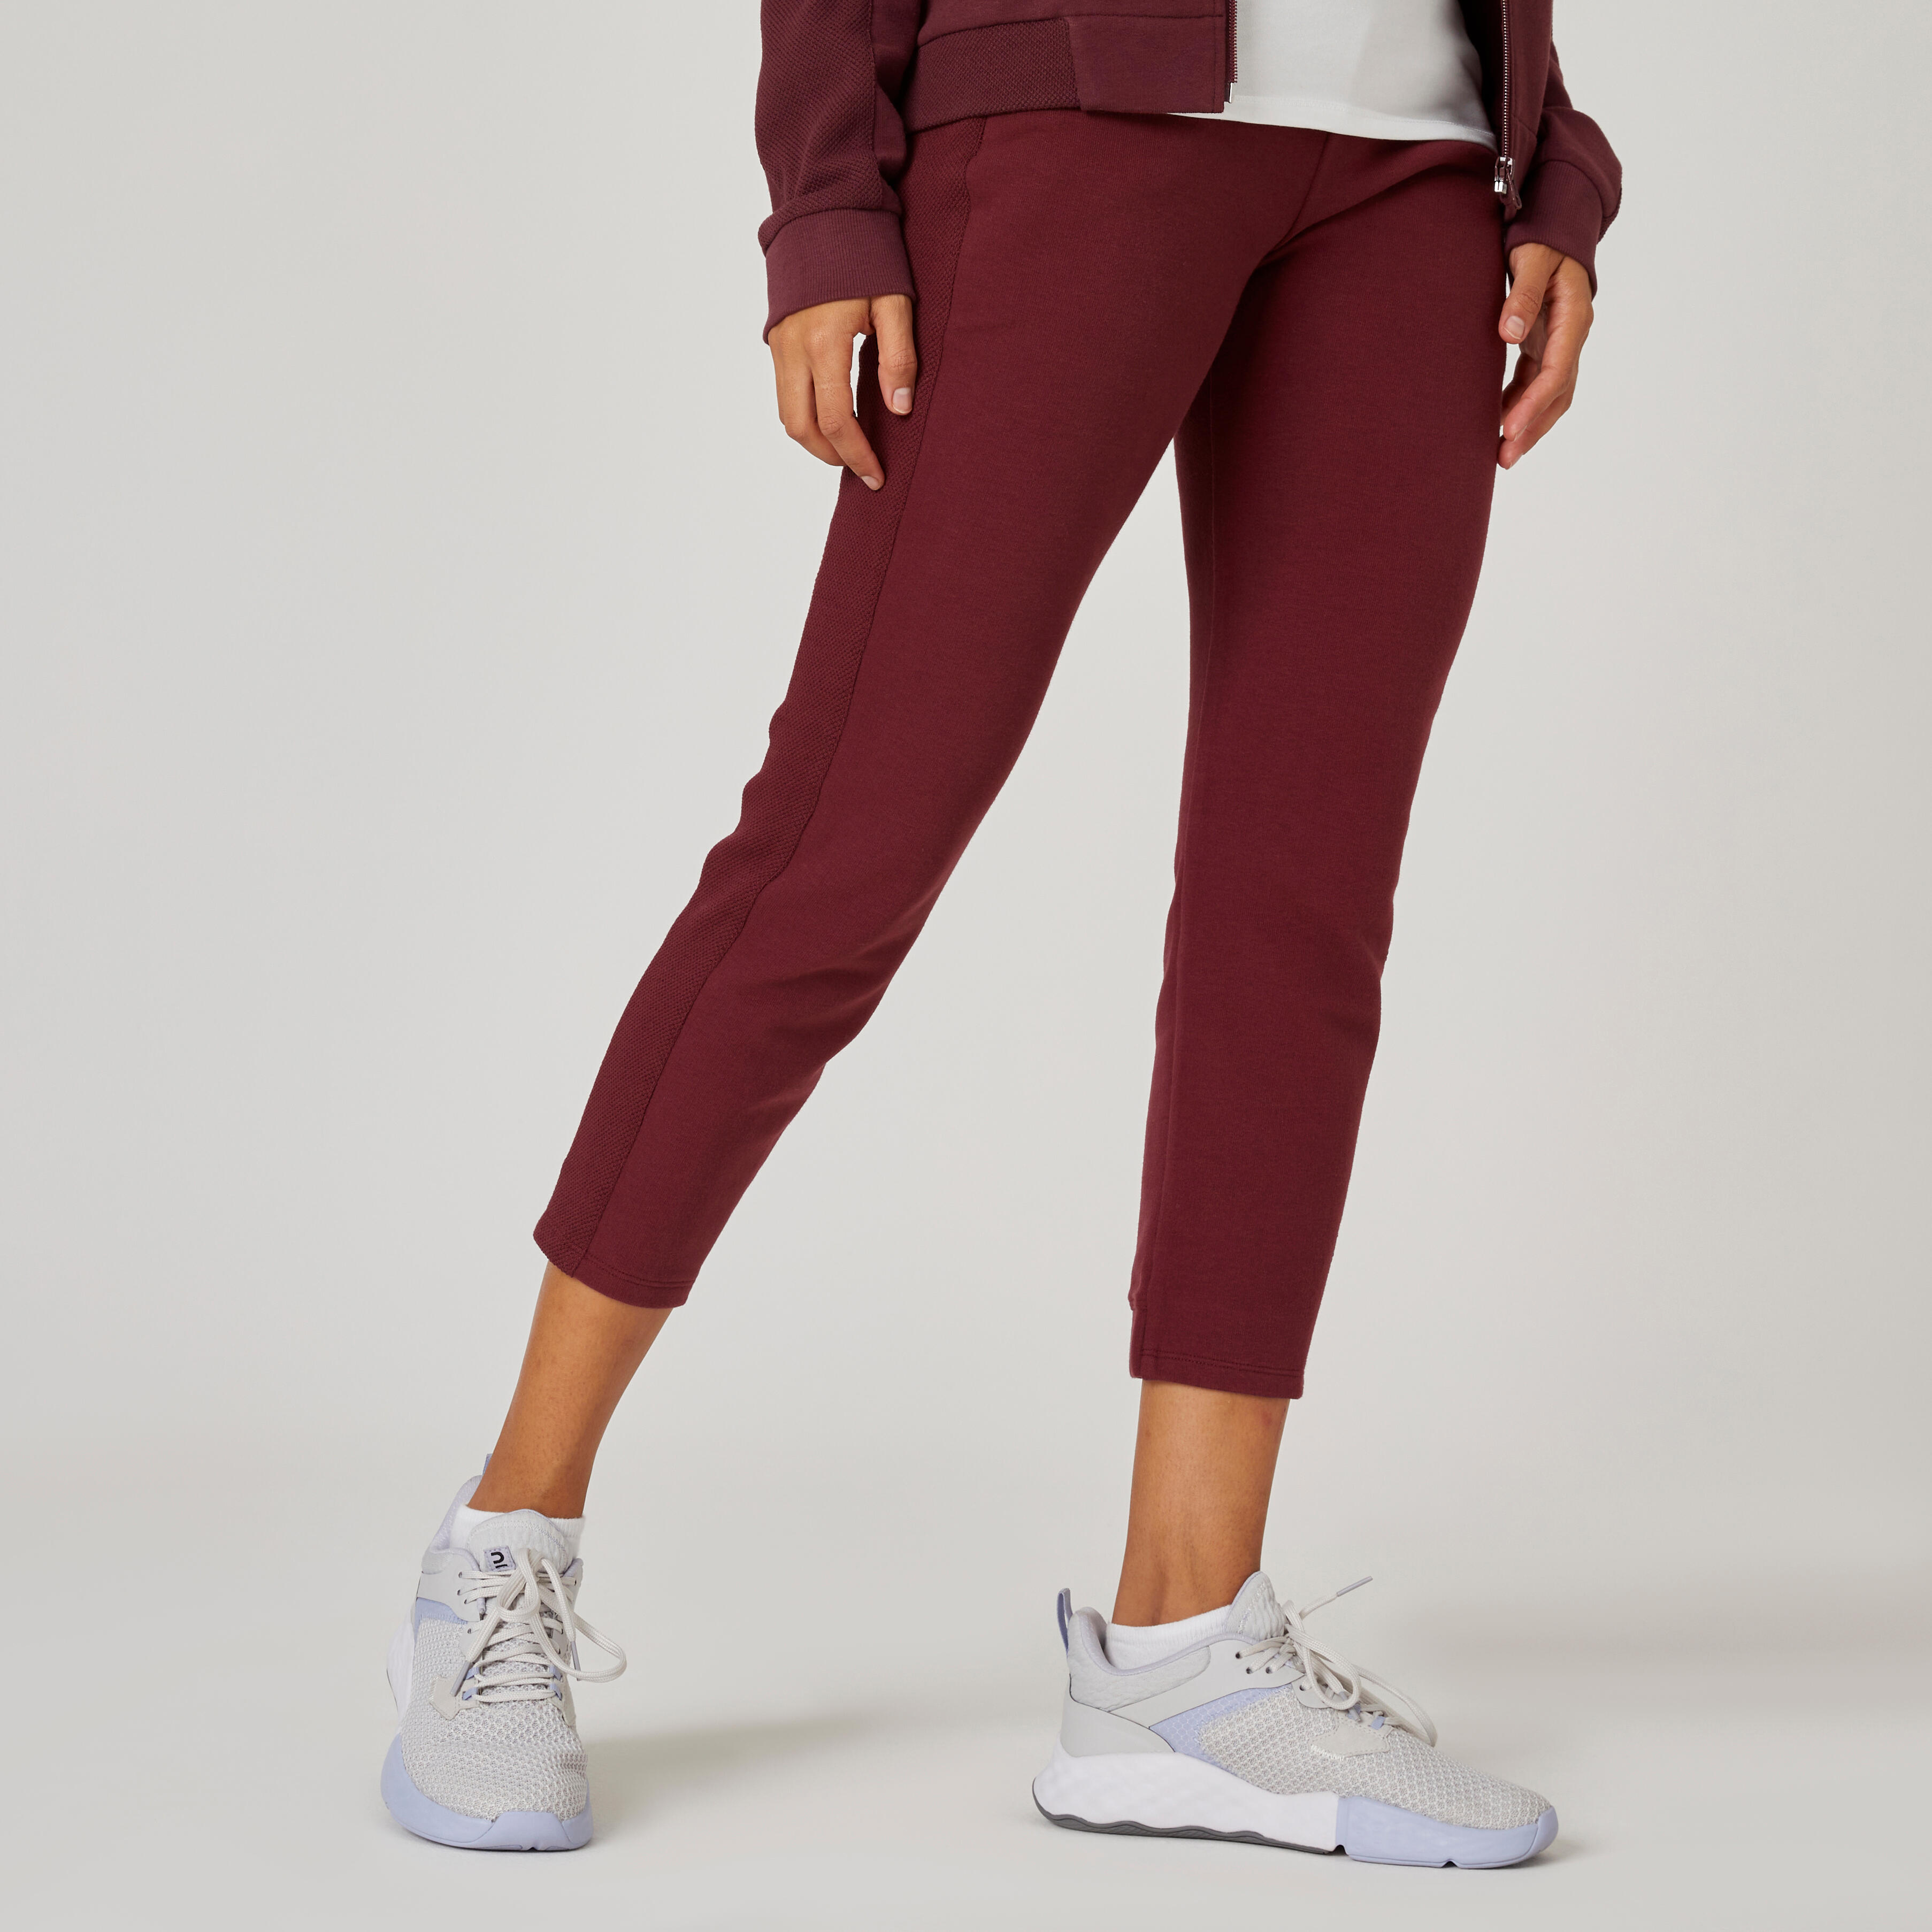 8 Maroon pants outfit ideas | fall outfits, cute outfits, burgundy pants